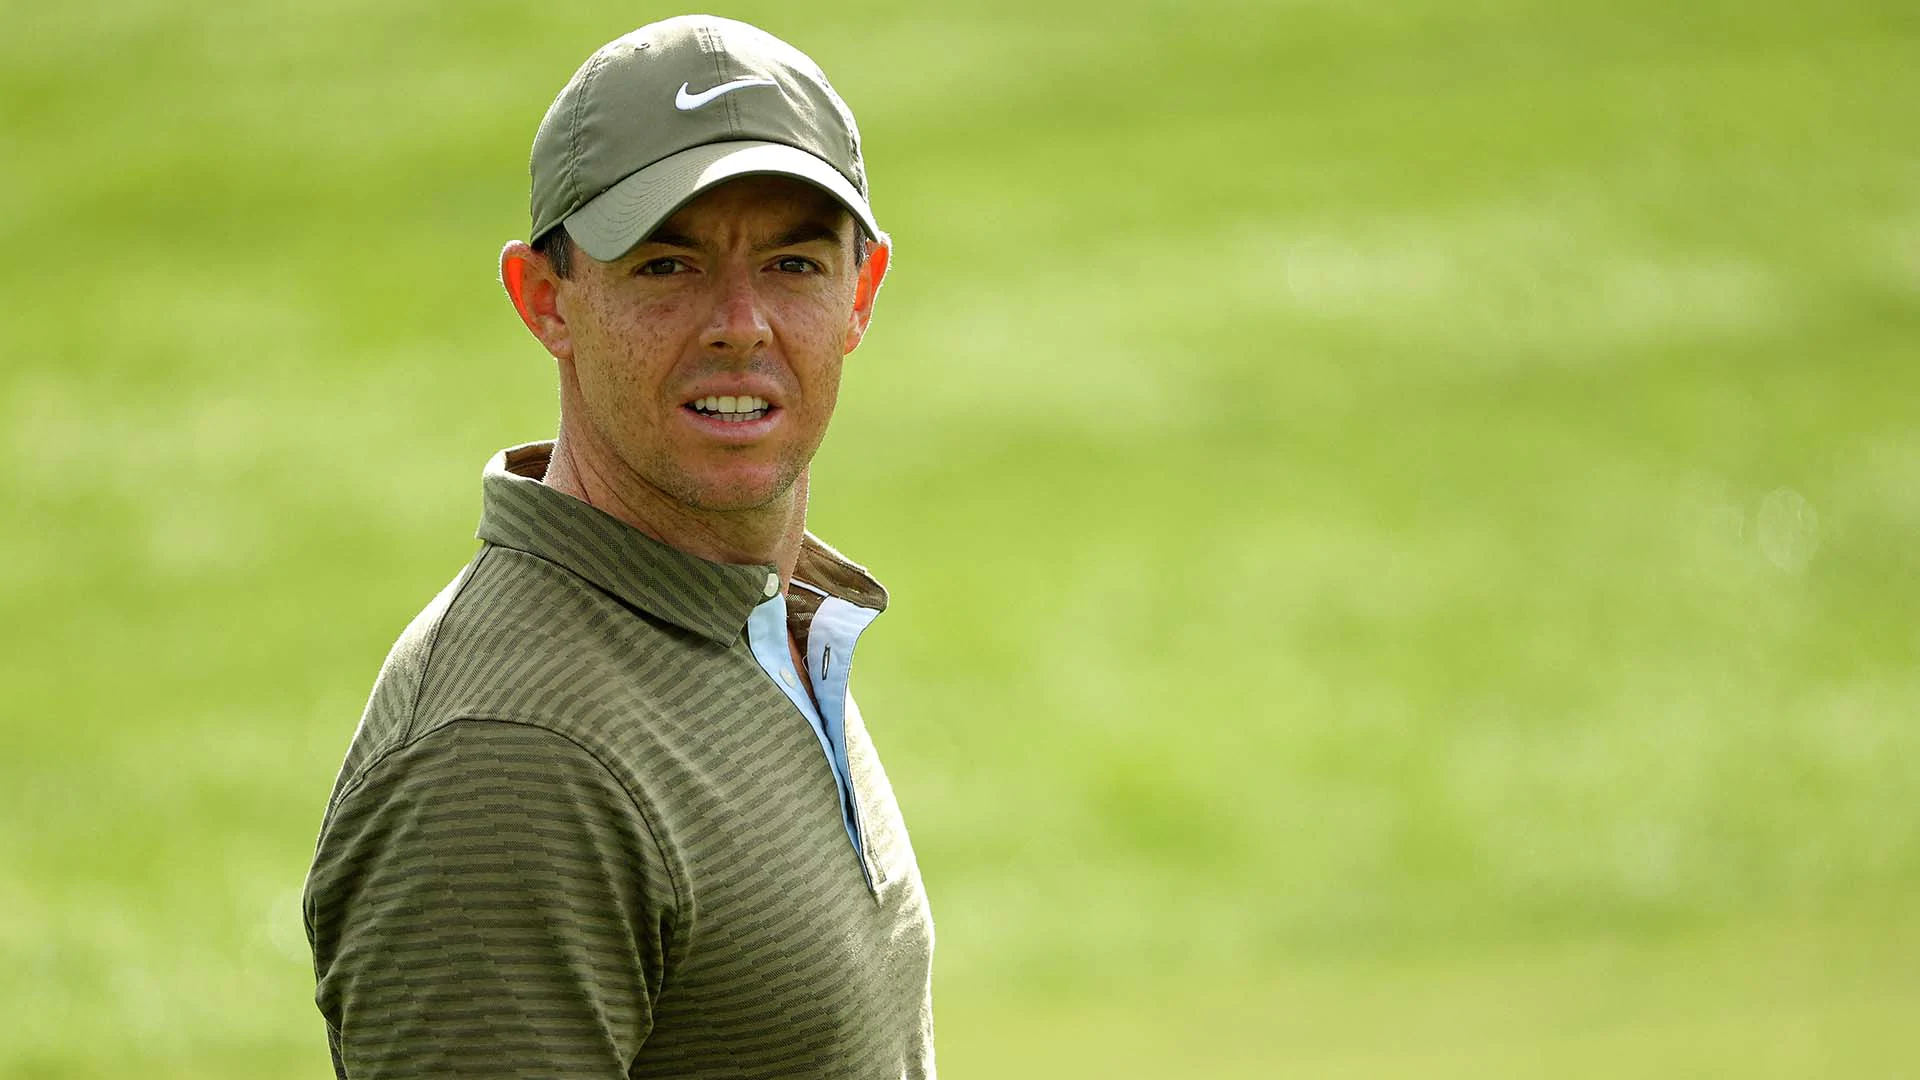 2020 Masters: From WTH to 66, Rory McIlroy still has a chance at this Masters